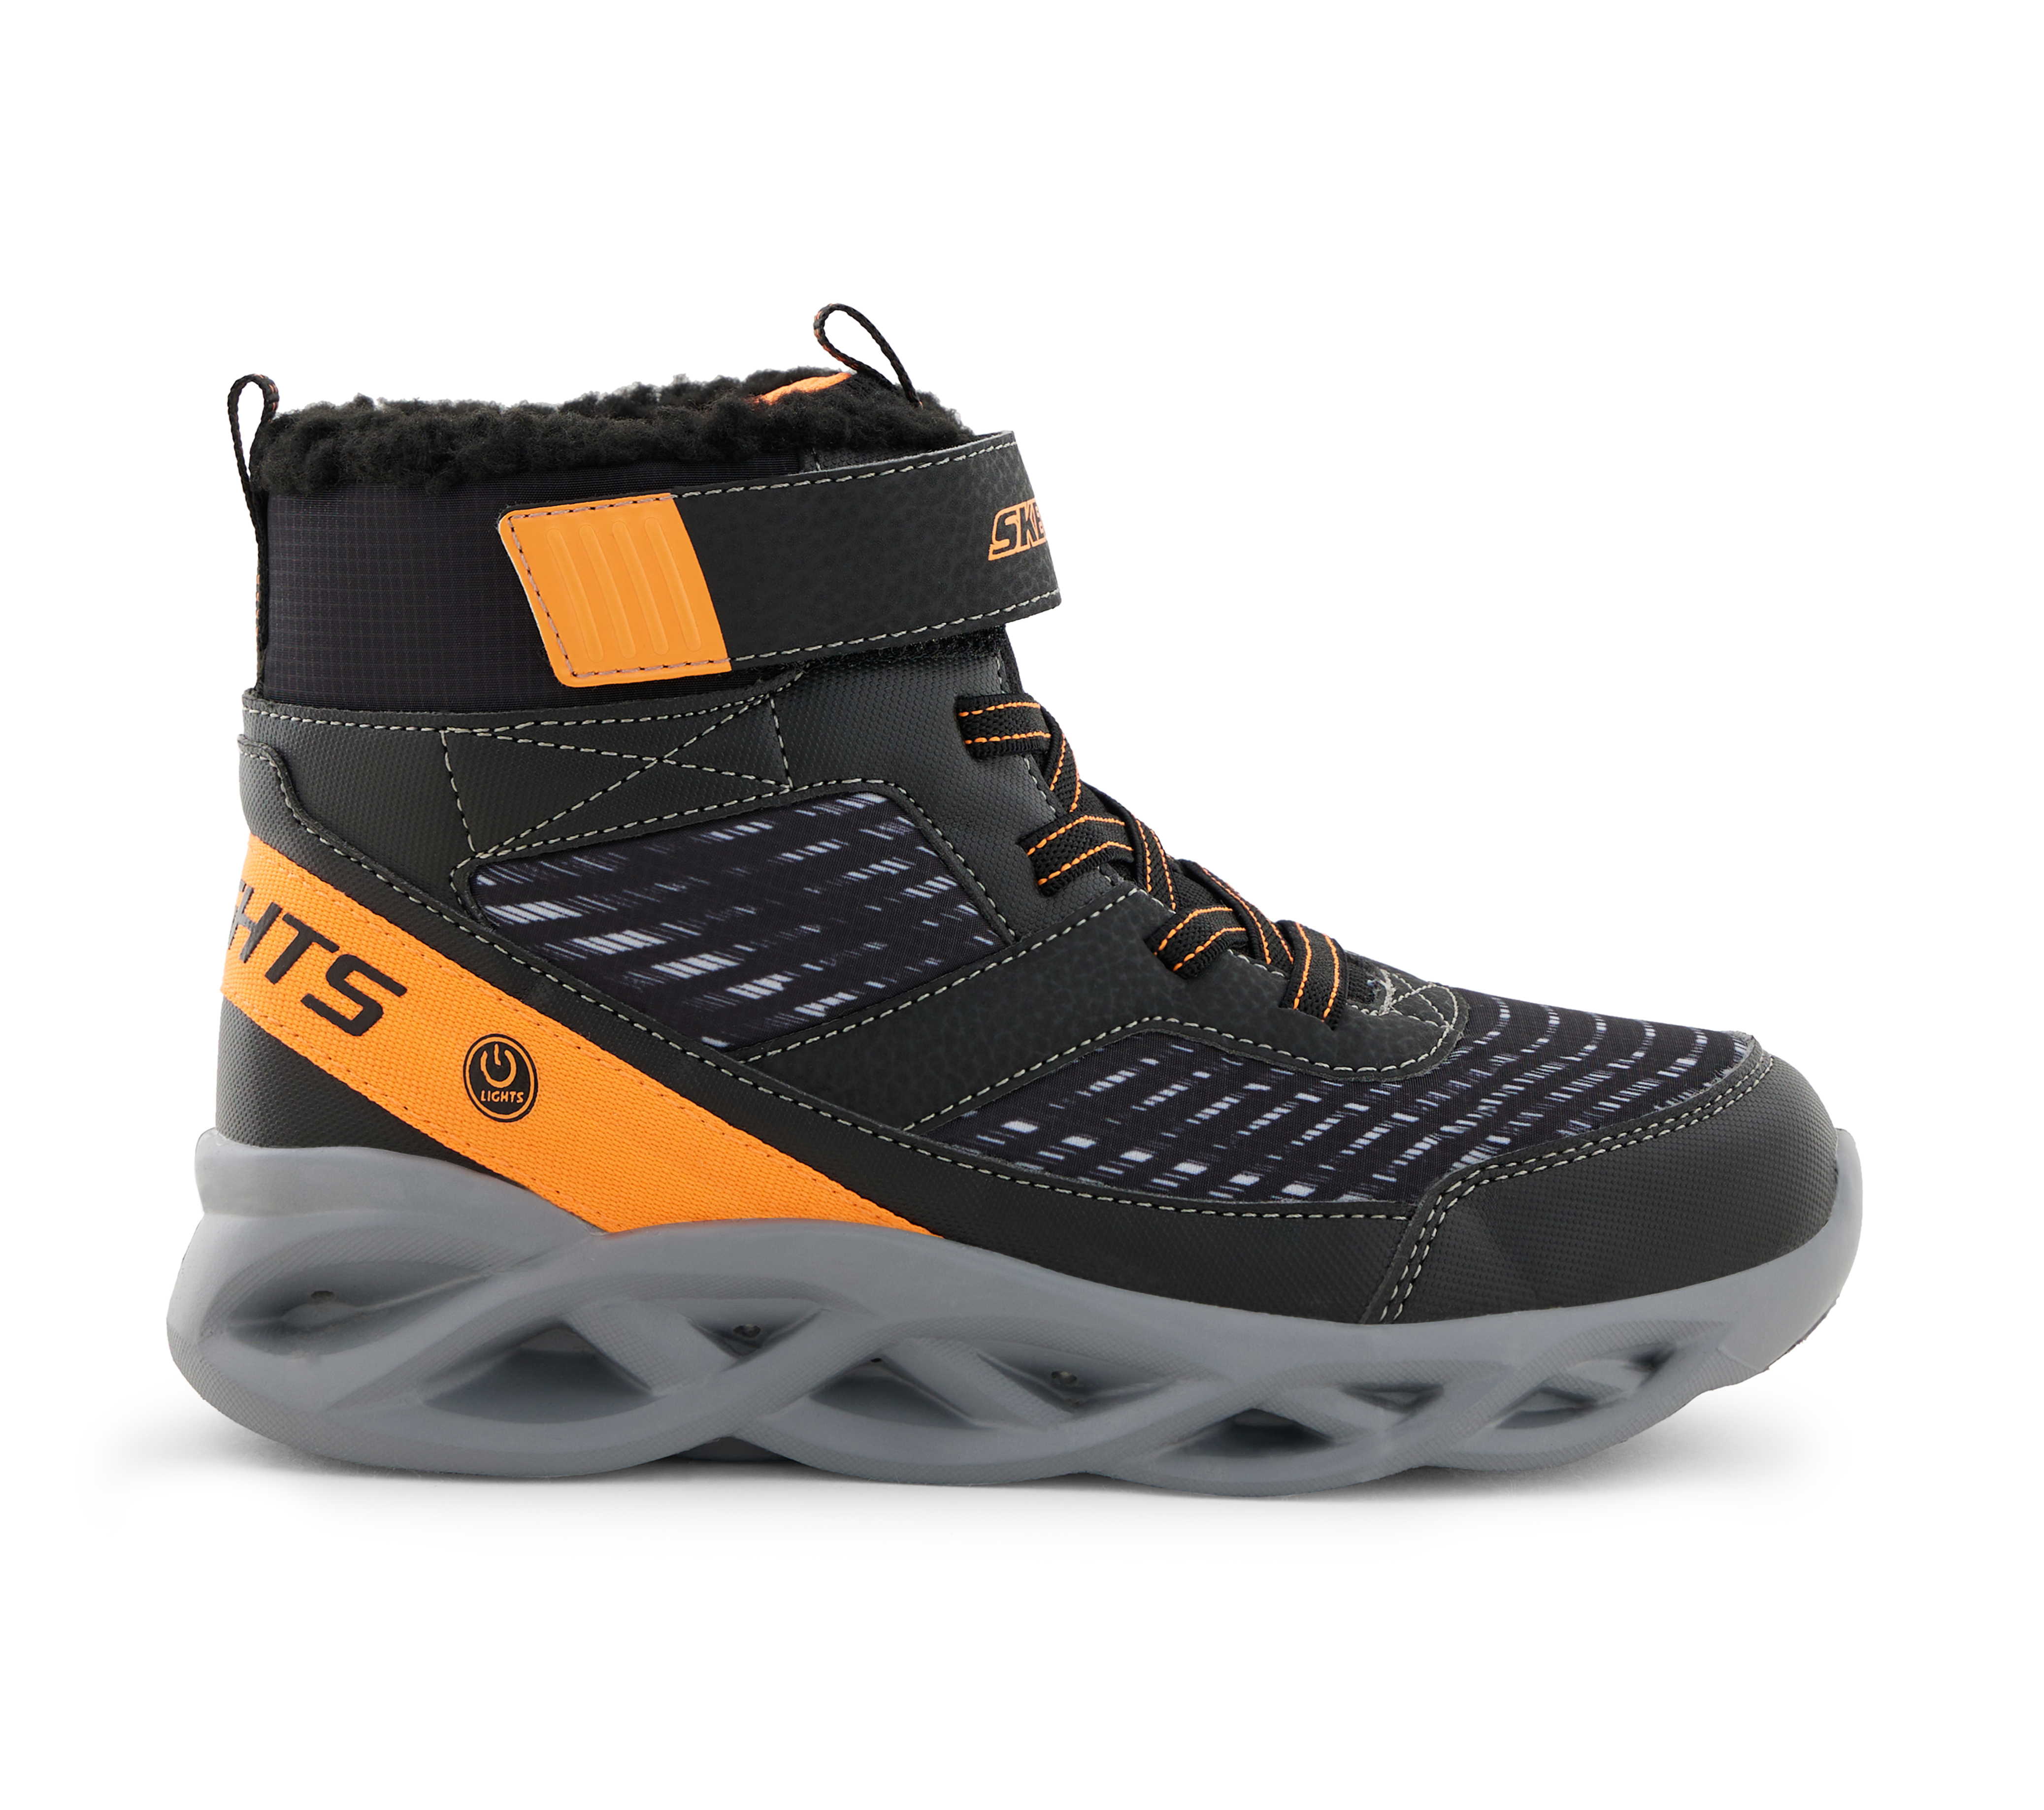 TWISTED-BRIGHTS - DROVOX, BLACK/ORANGE Footwear Right View